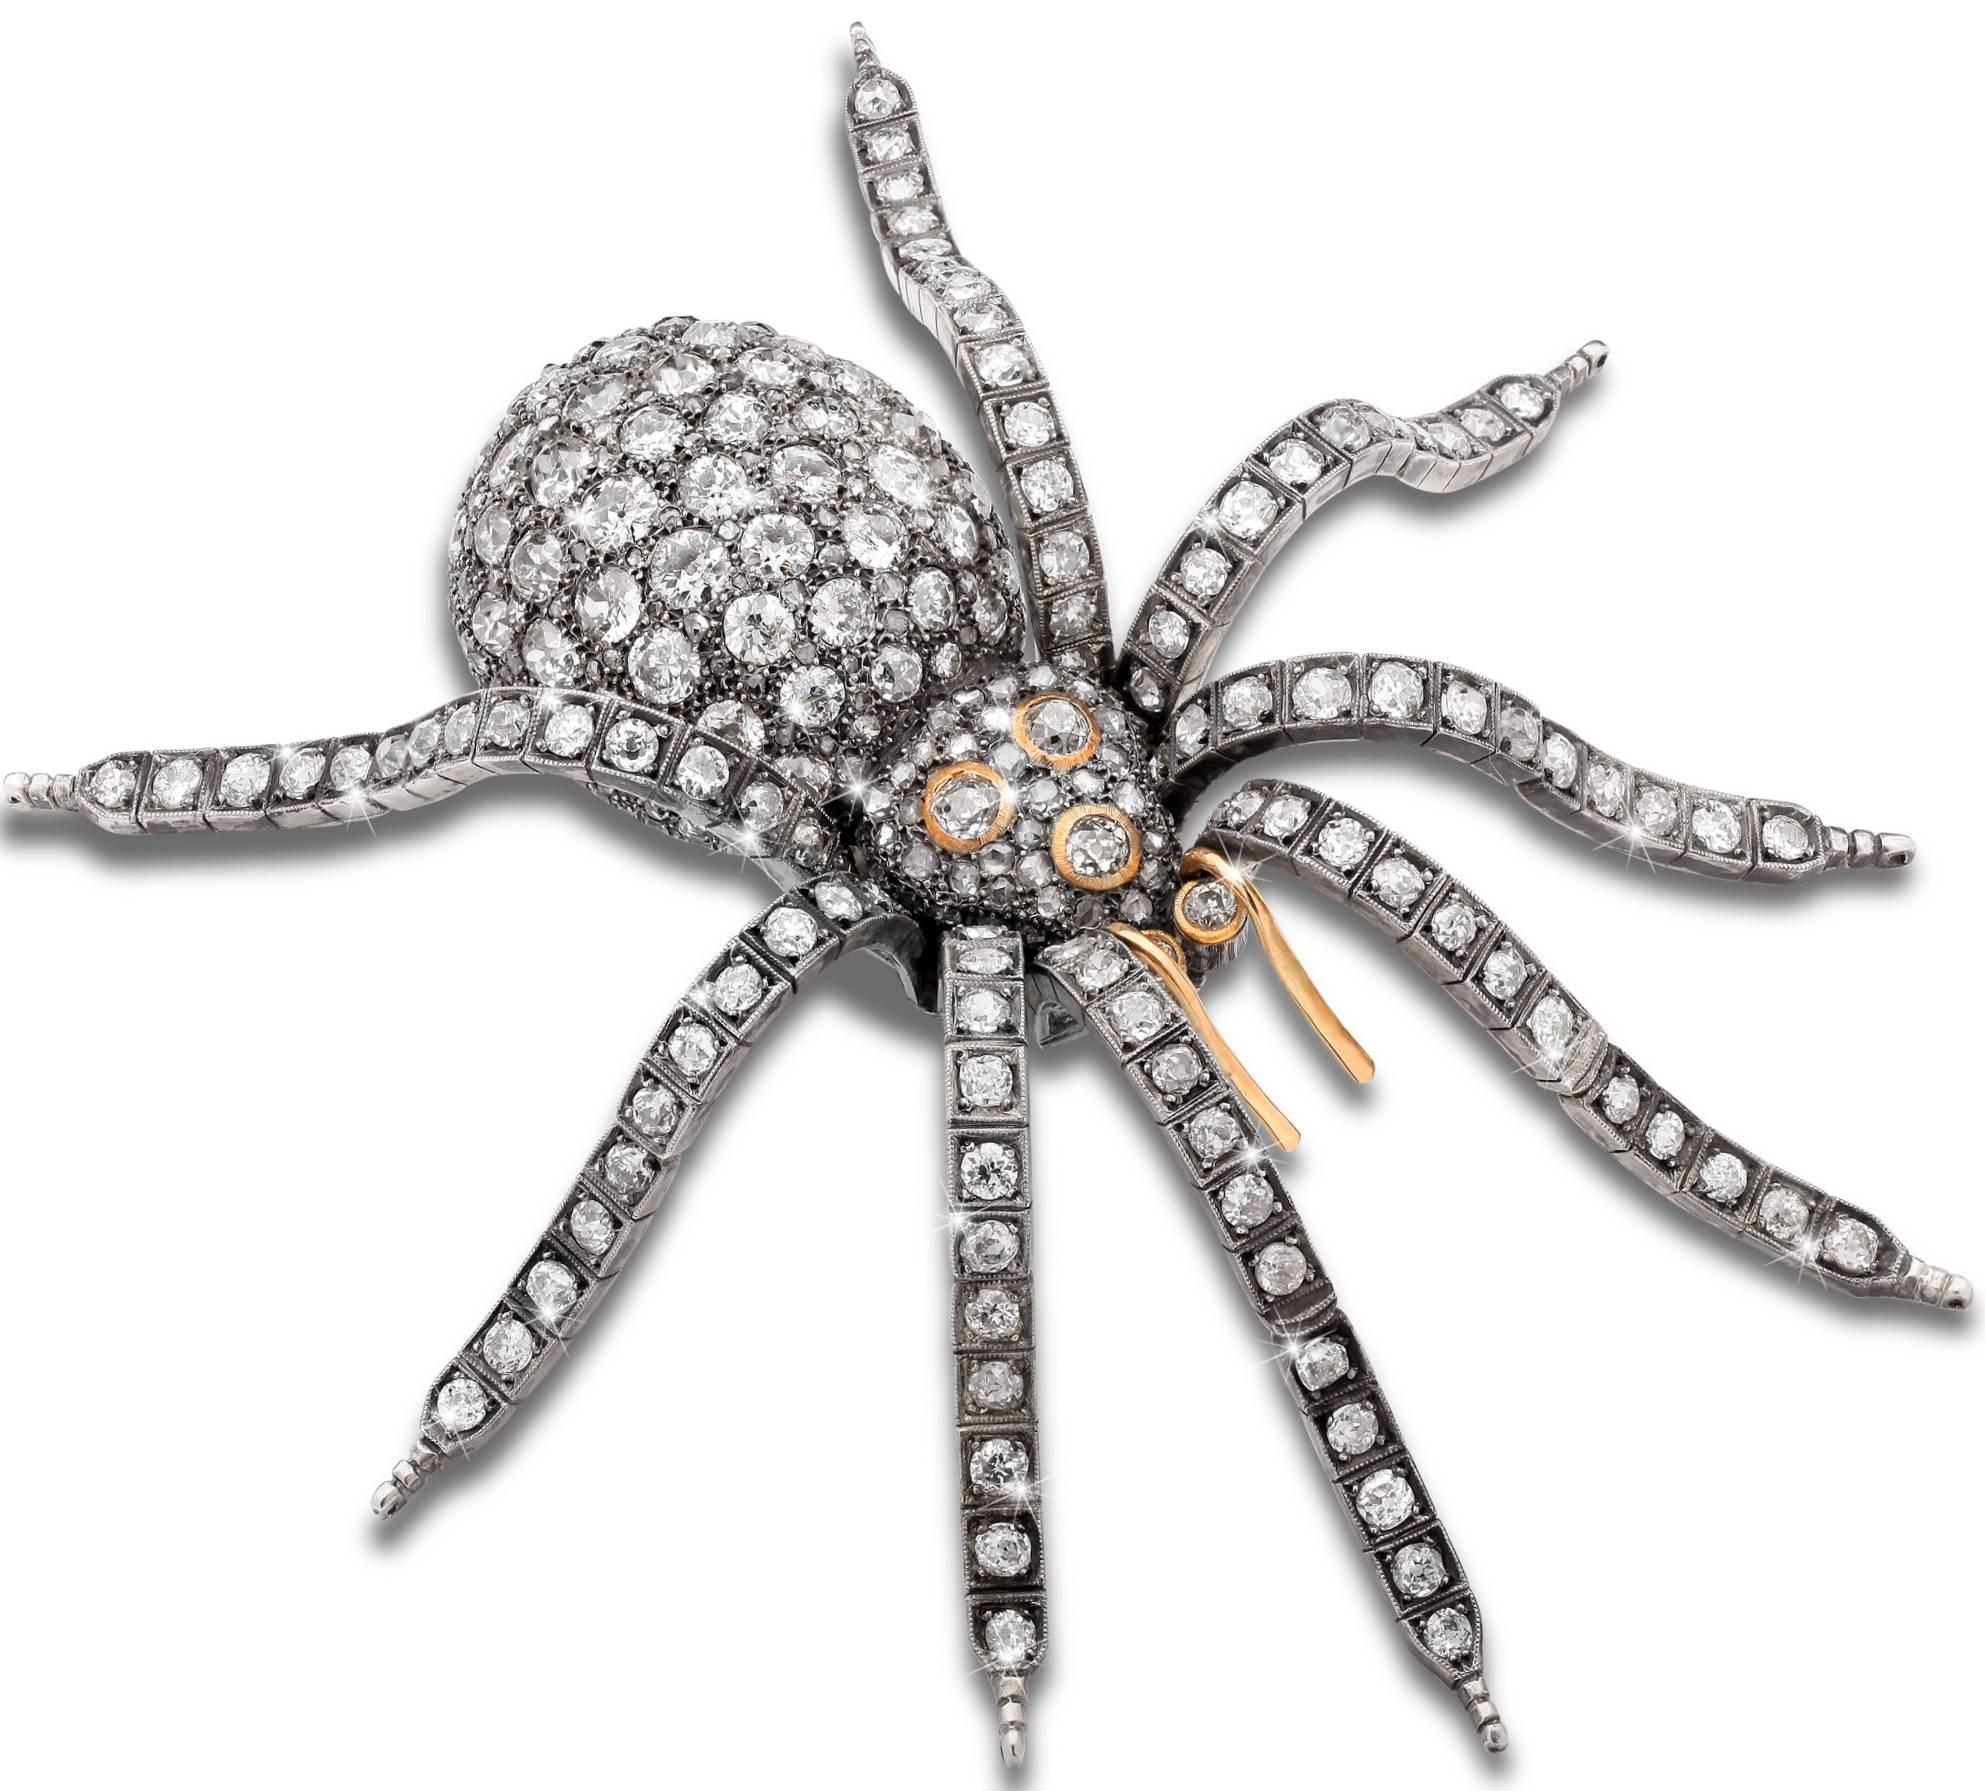 Magnificent XtraLarge Spider Pin 5 5/8 in 43cts Diamonds Gold SilverTremblant c 5